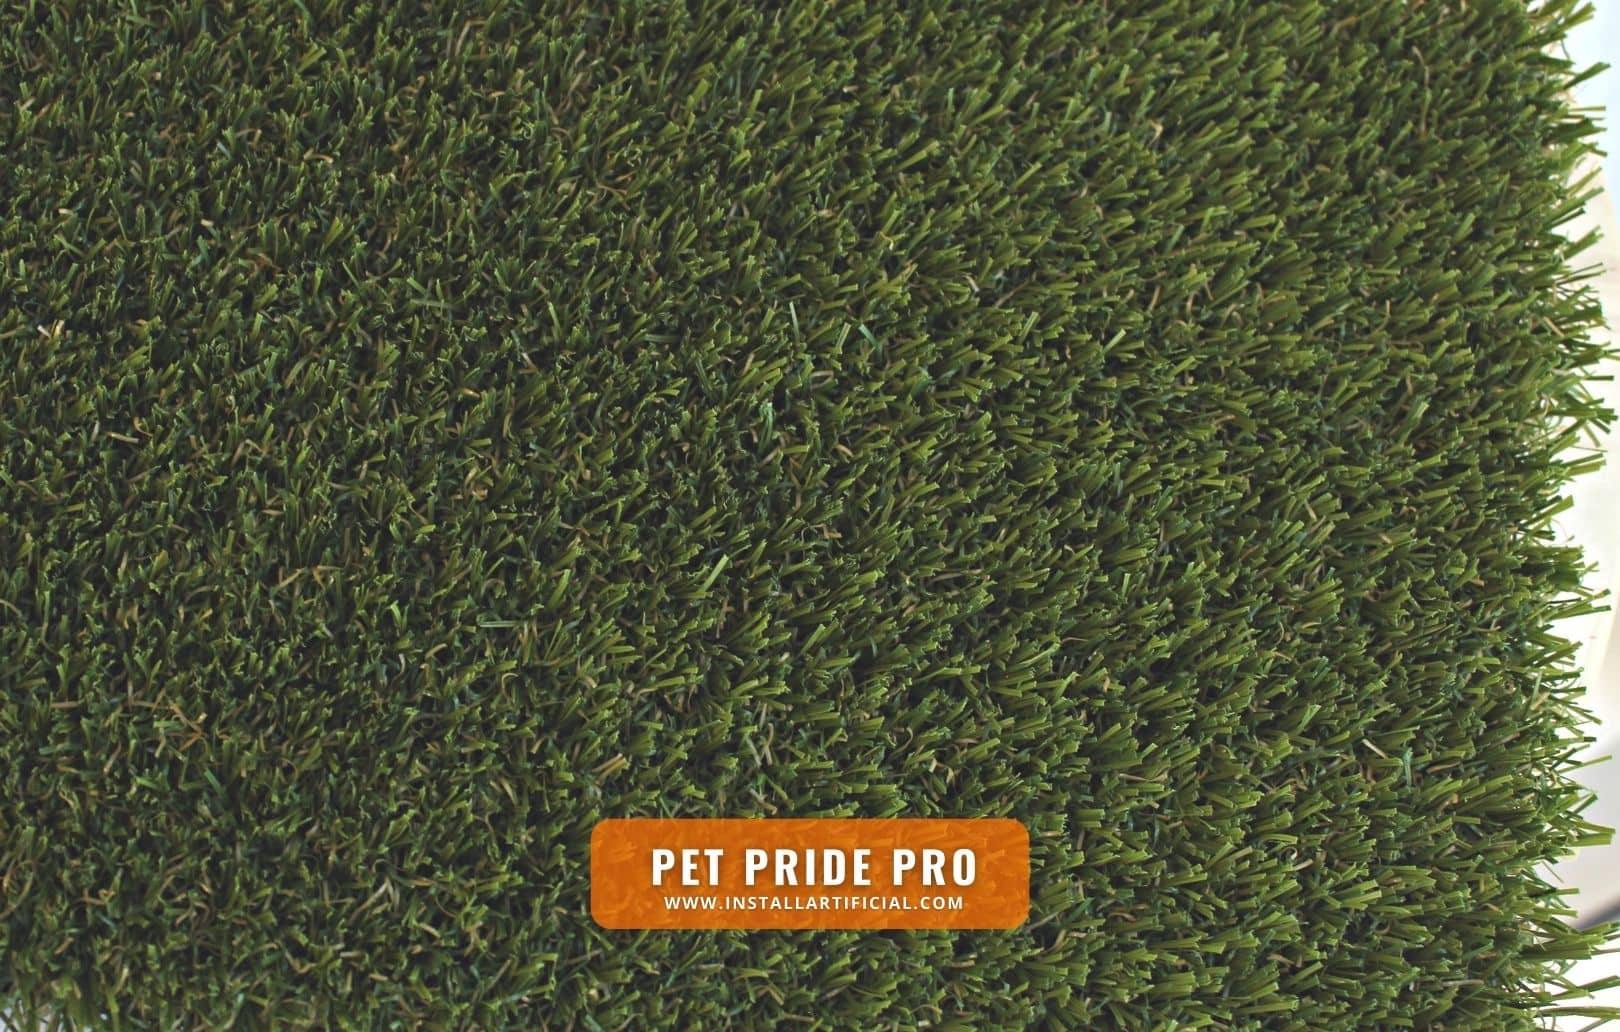 Pet Pride Pro, Imperial Synthetic Turf, top